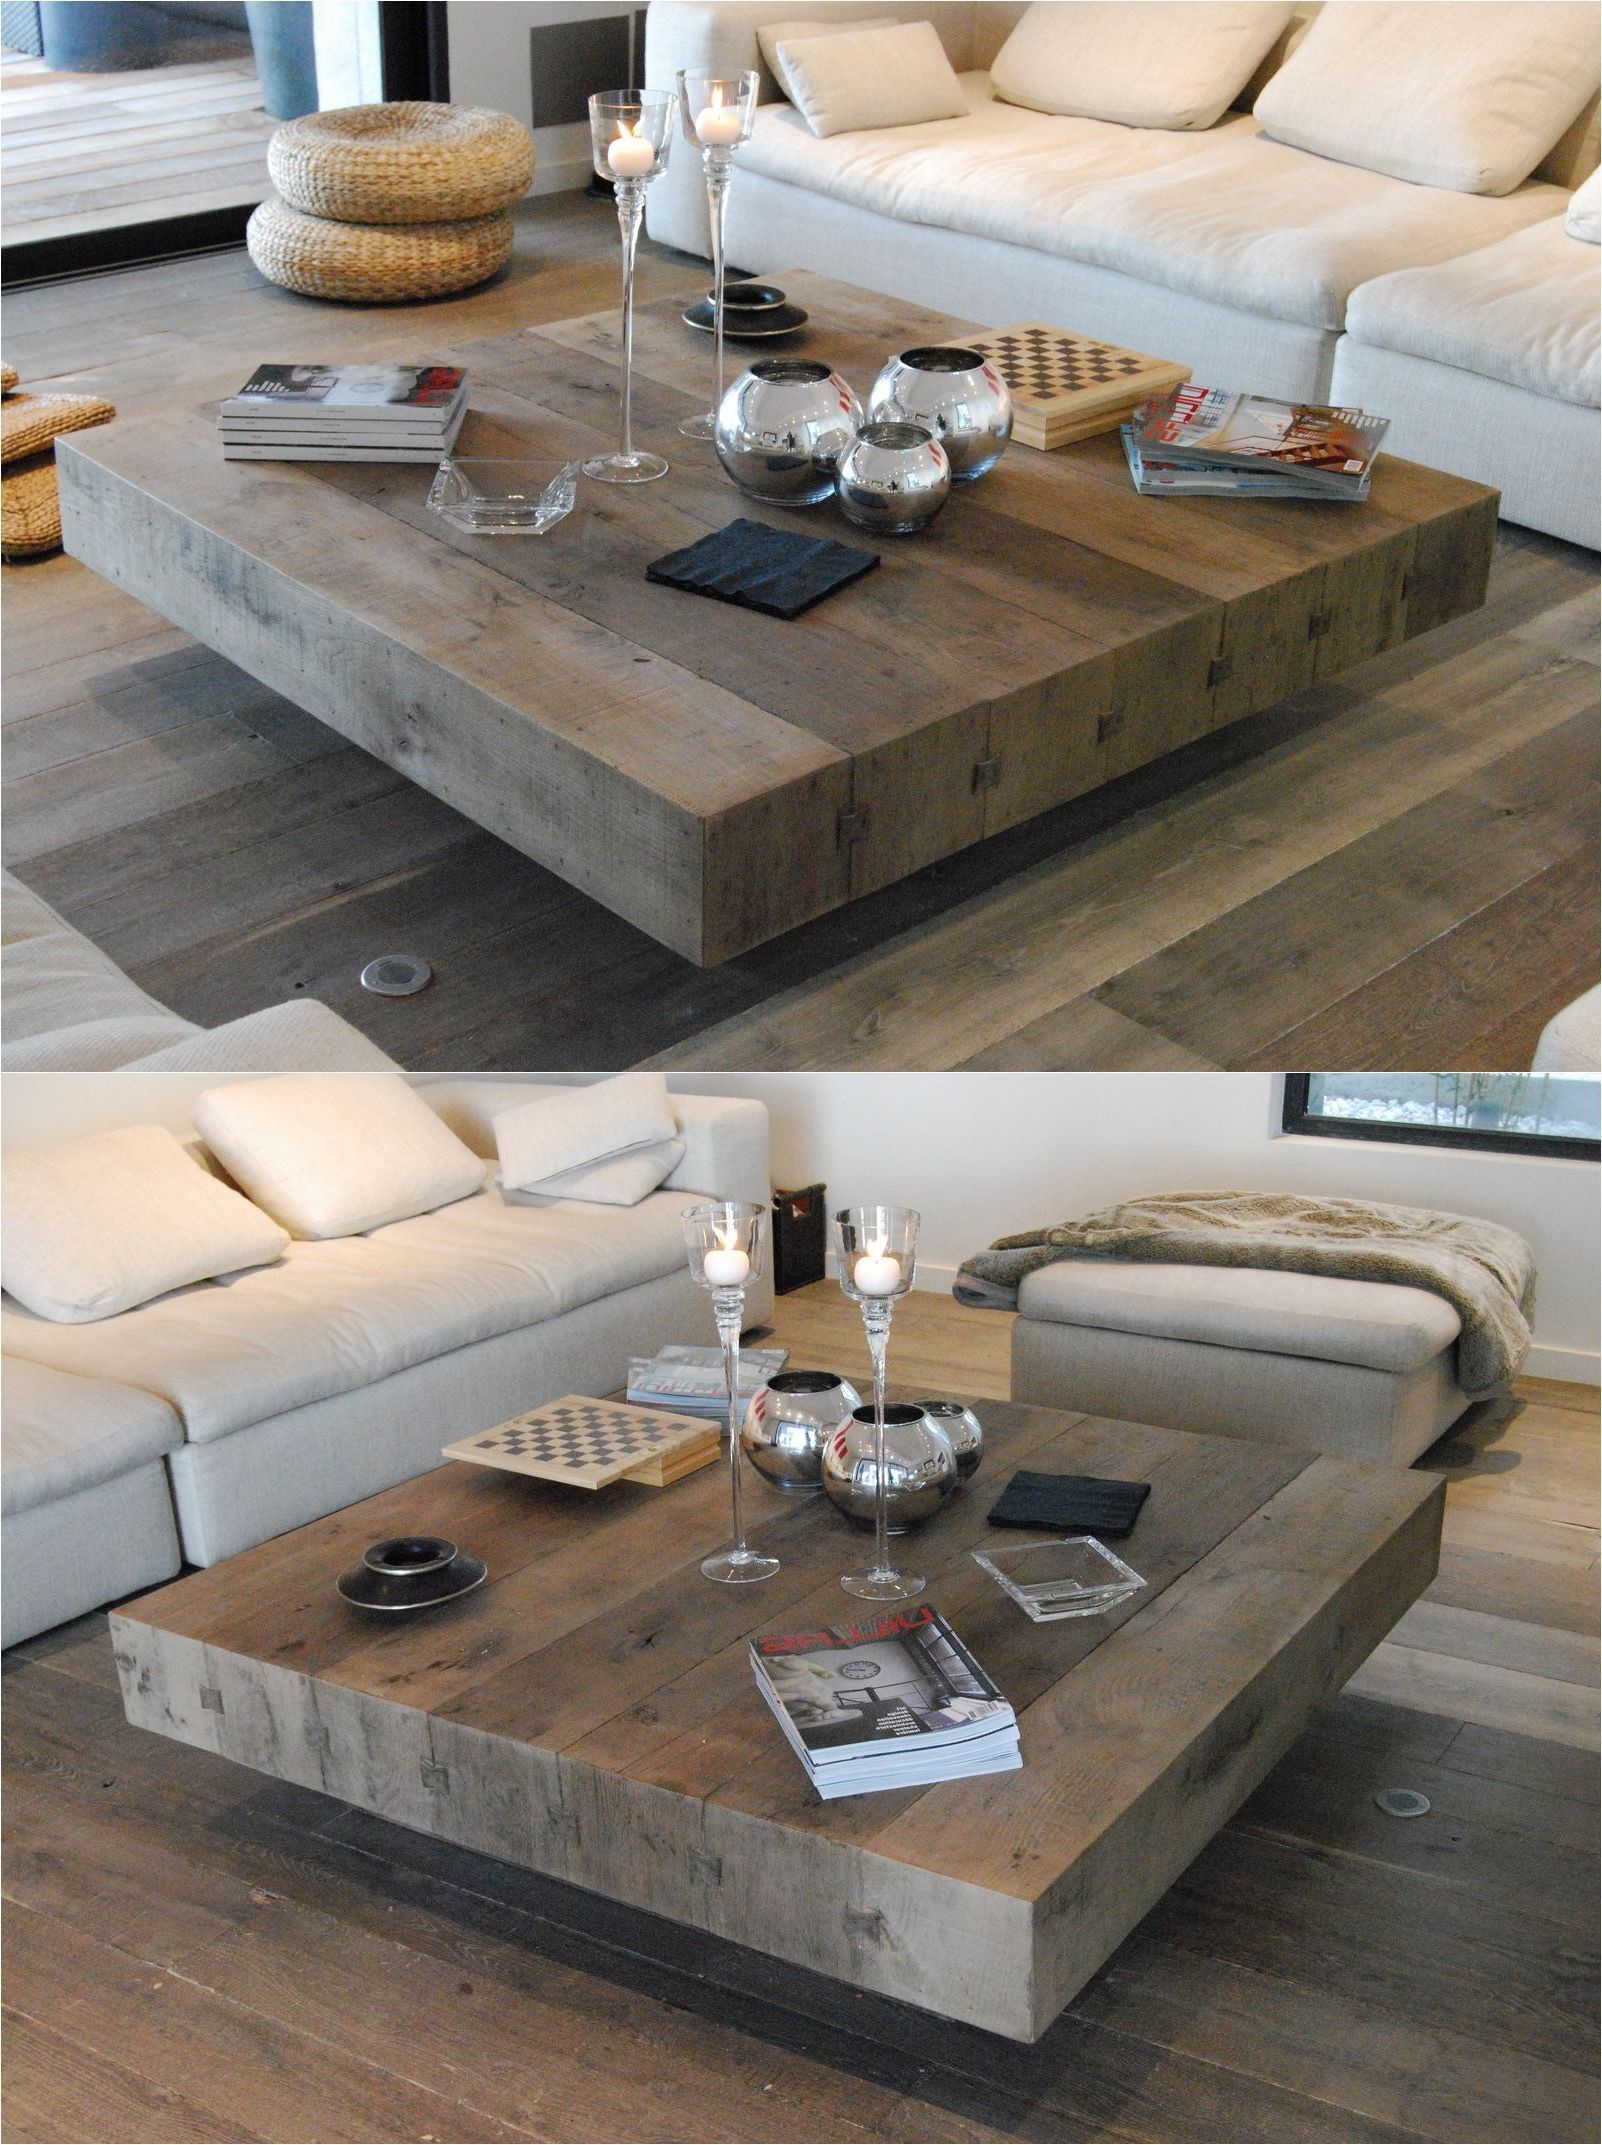 15 Large Square Coffee Tables For Sale Inspiration Pertaining To Current 1 Shelf Square Coffee Tables (View 2 of 20)